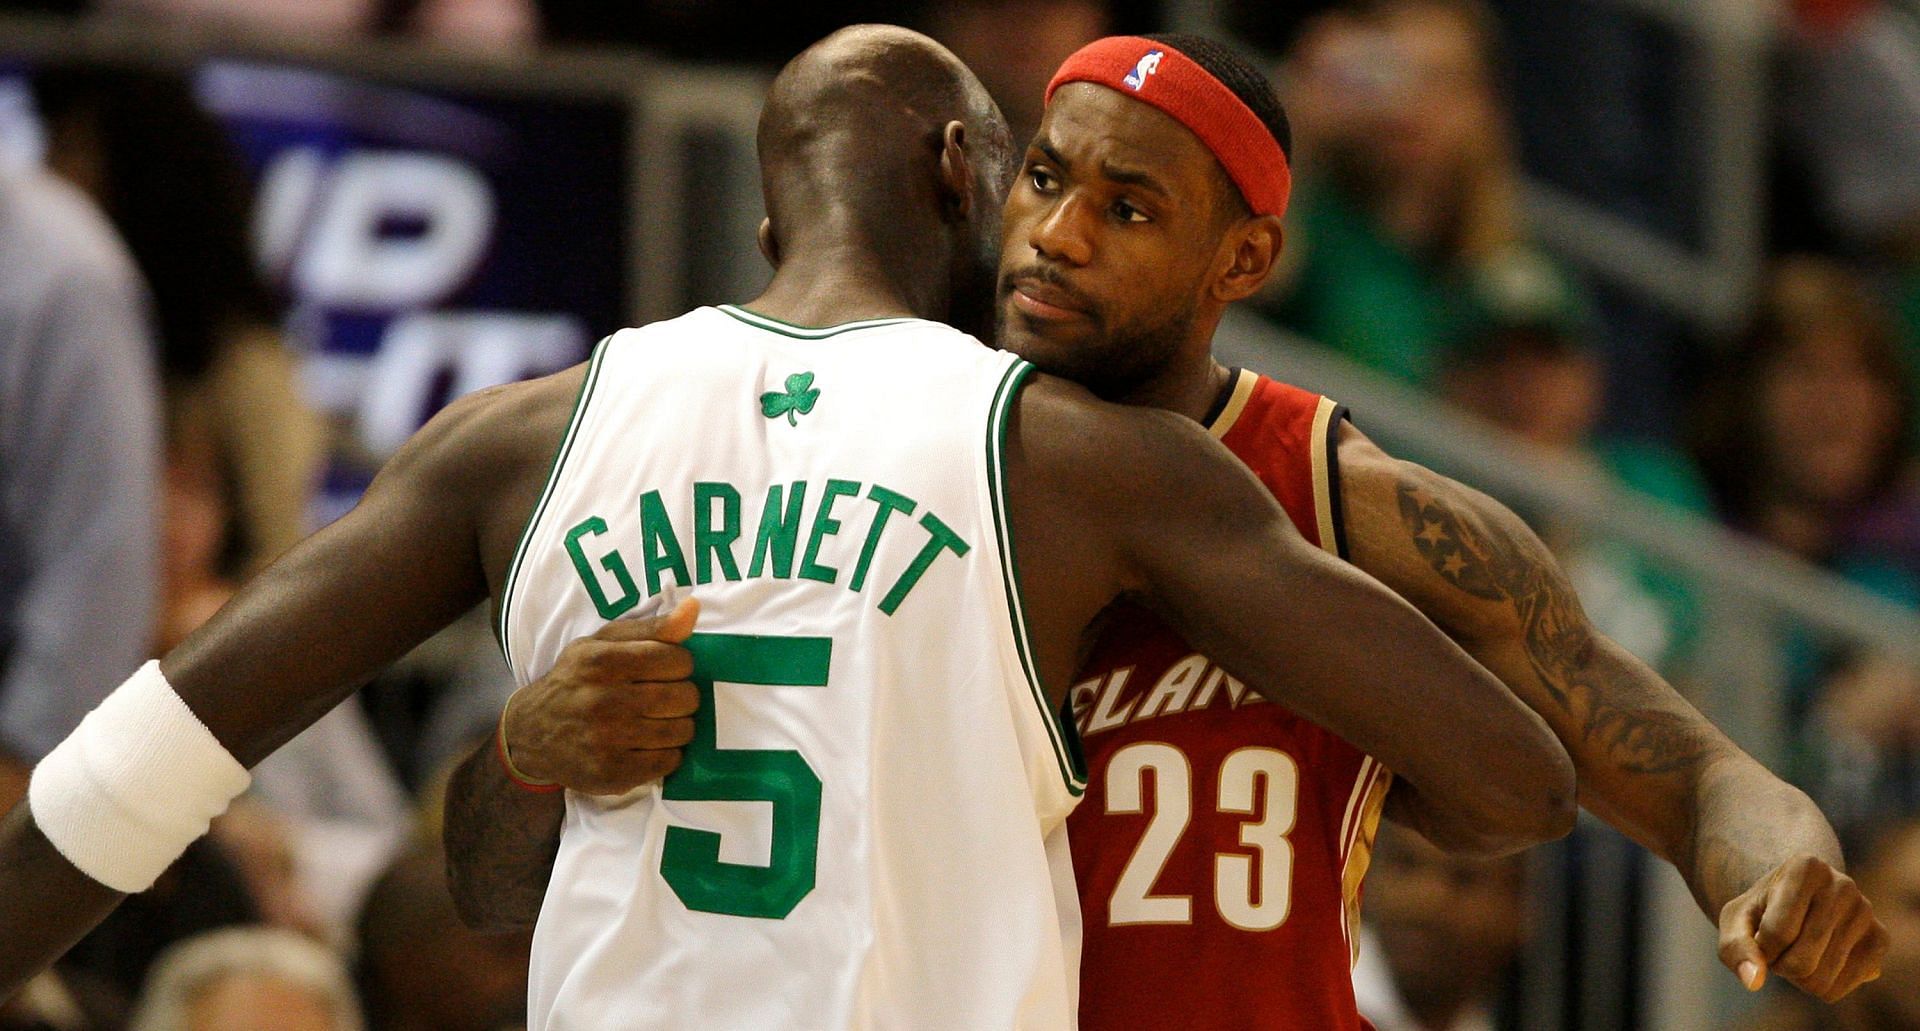 Kevin Garnett and LeBron James had countless battles on the NBA court